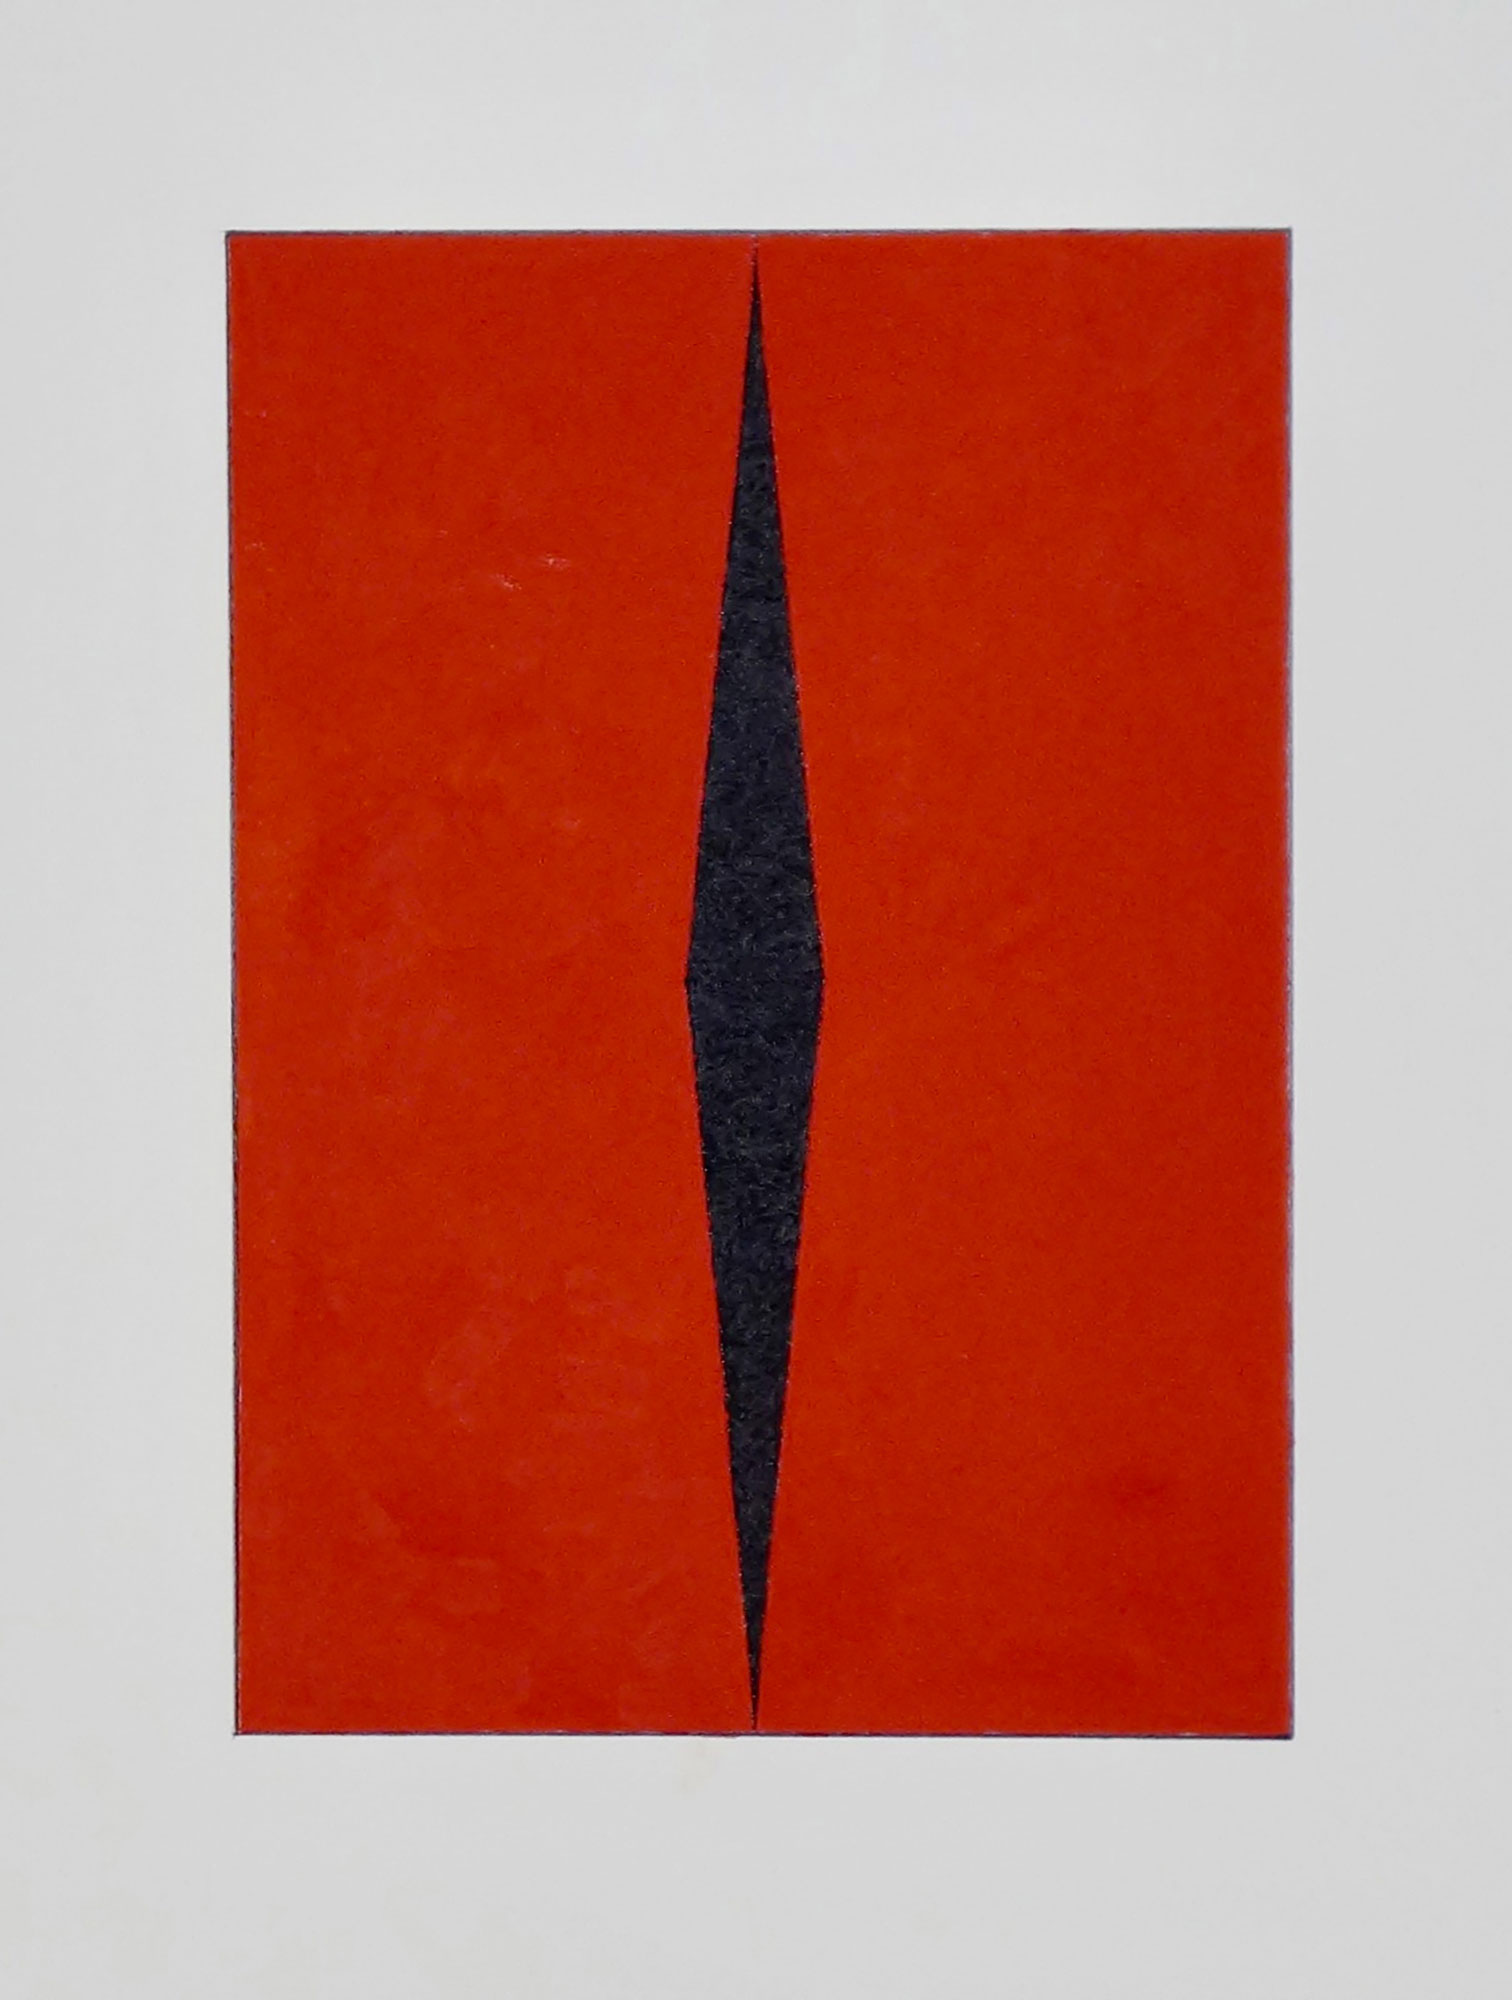 Kenneth Dingwall, Opening Passage Red, 2009, graphite and casein on paper, 21cm x 15cm